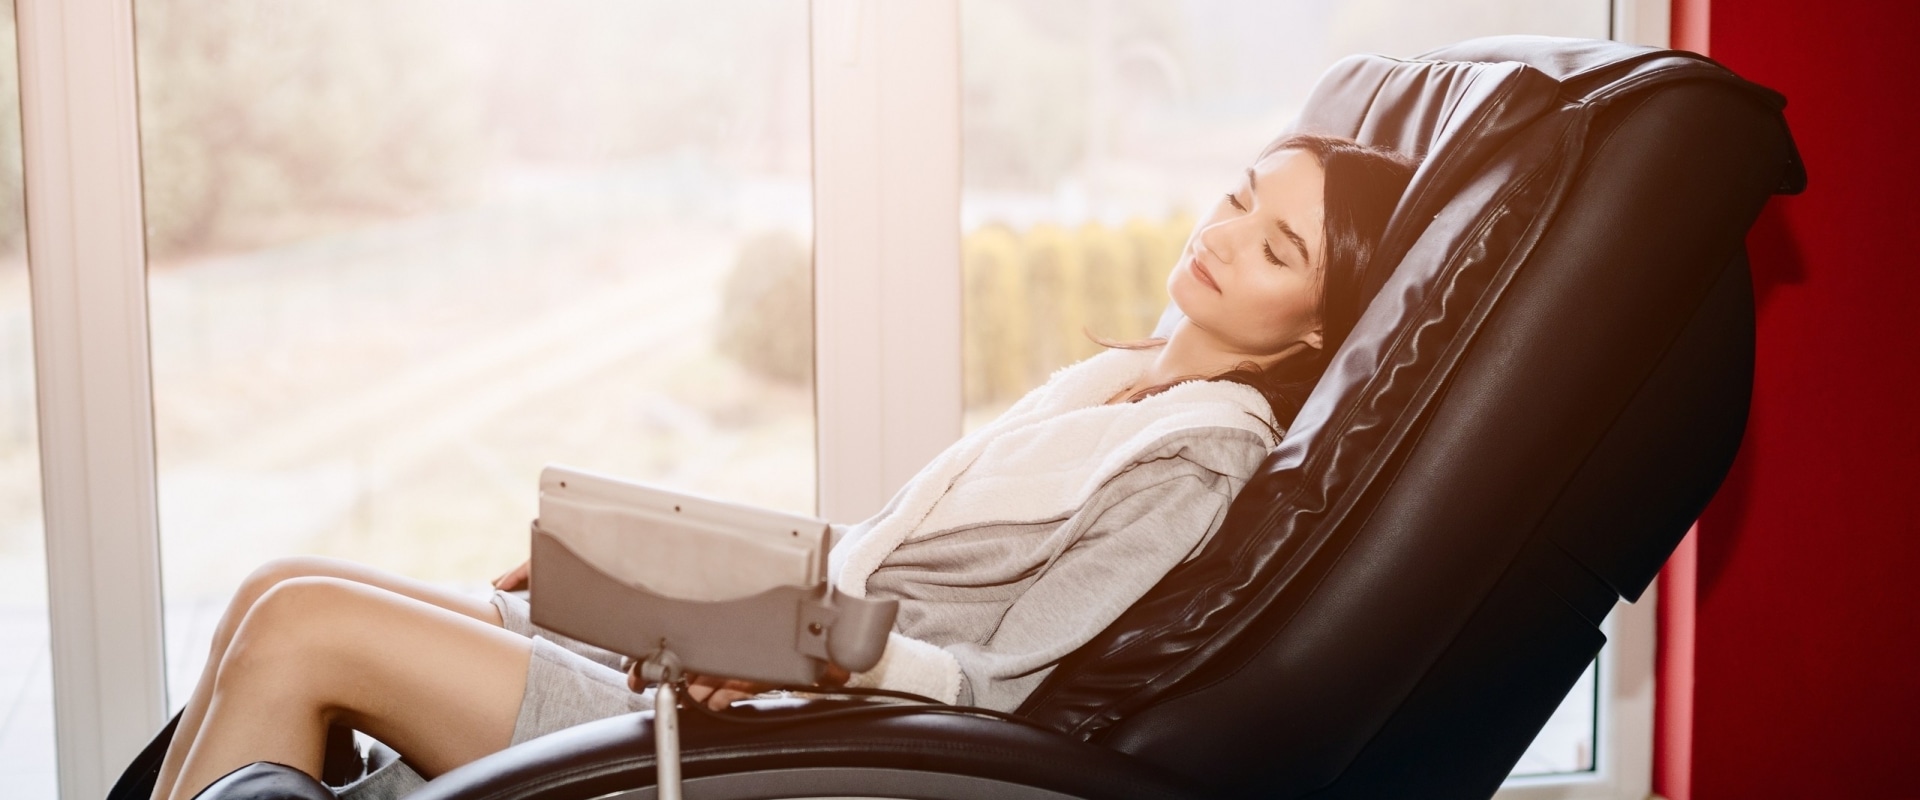 When Is It Not Safe to Use a Massage Chair?